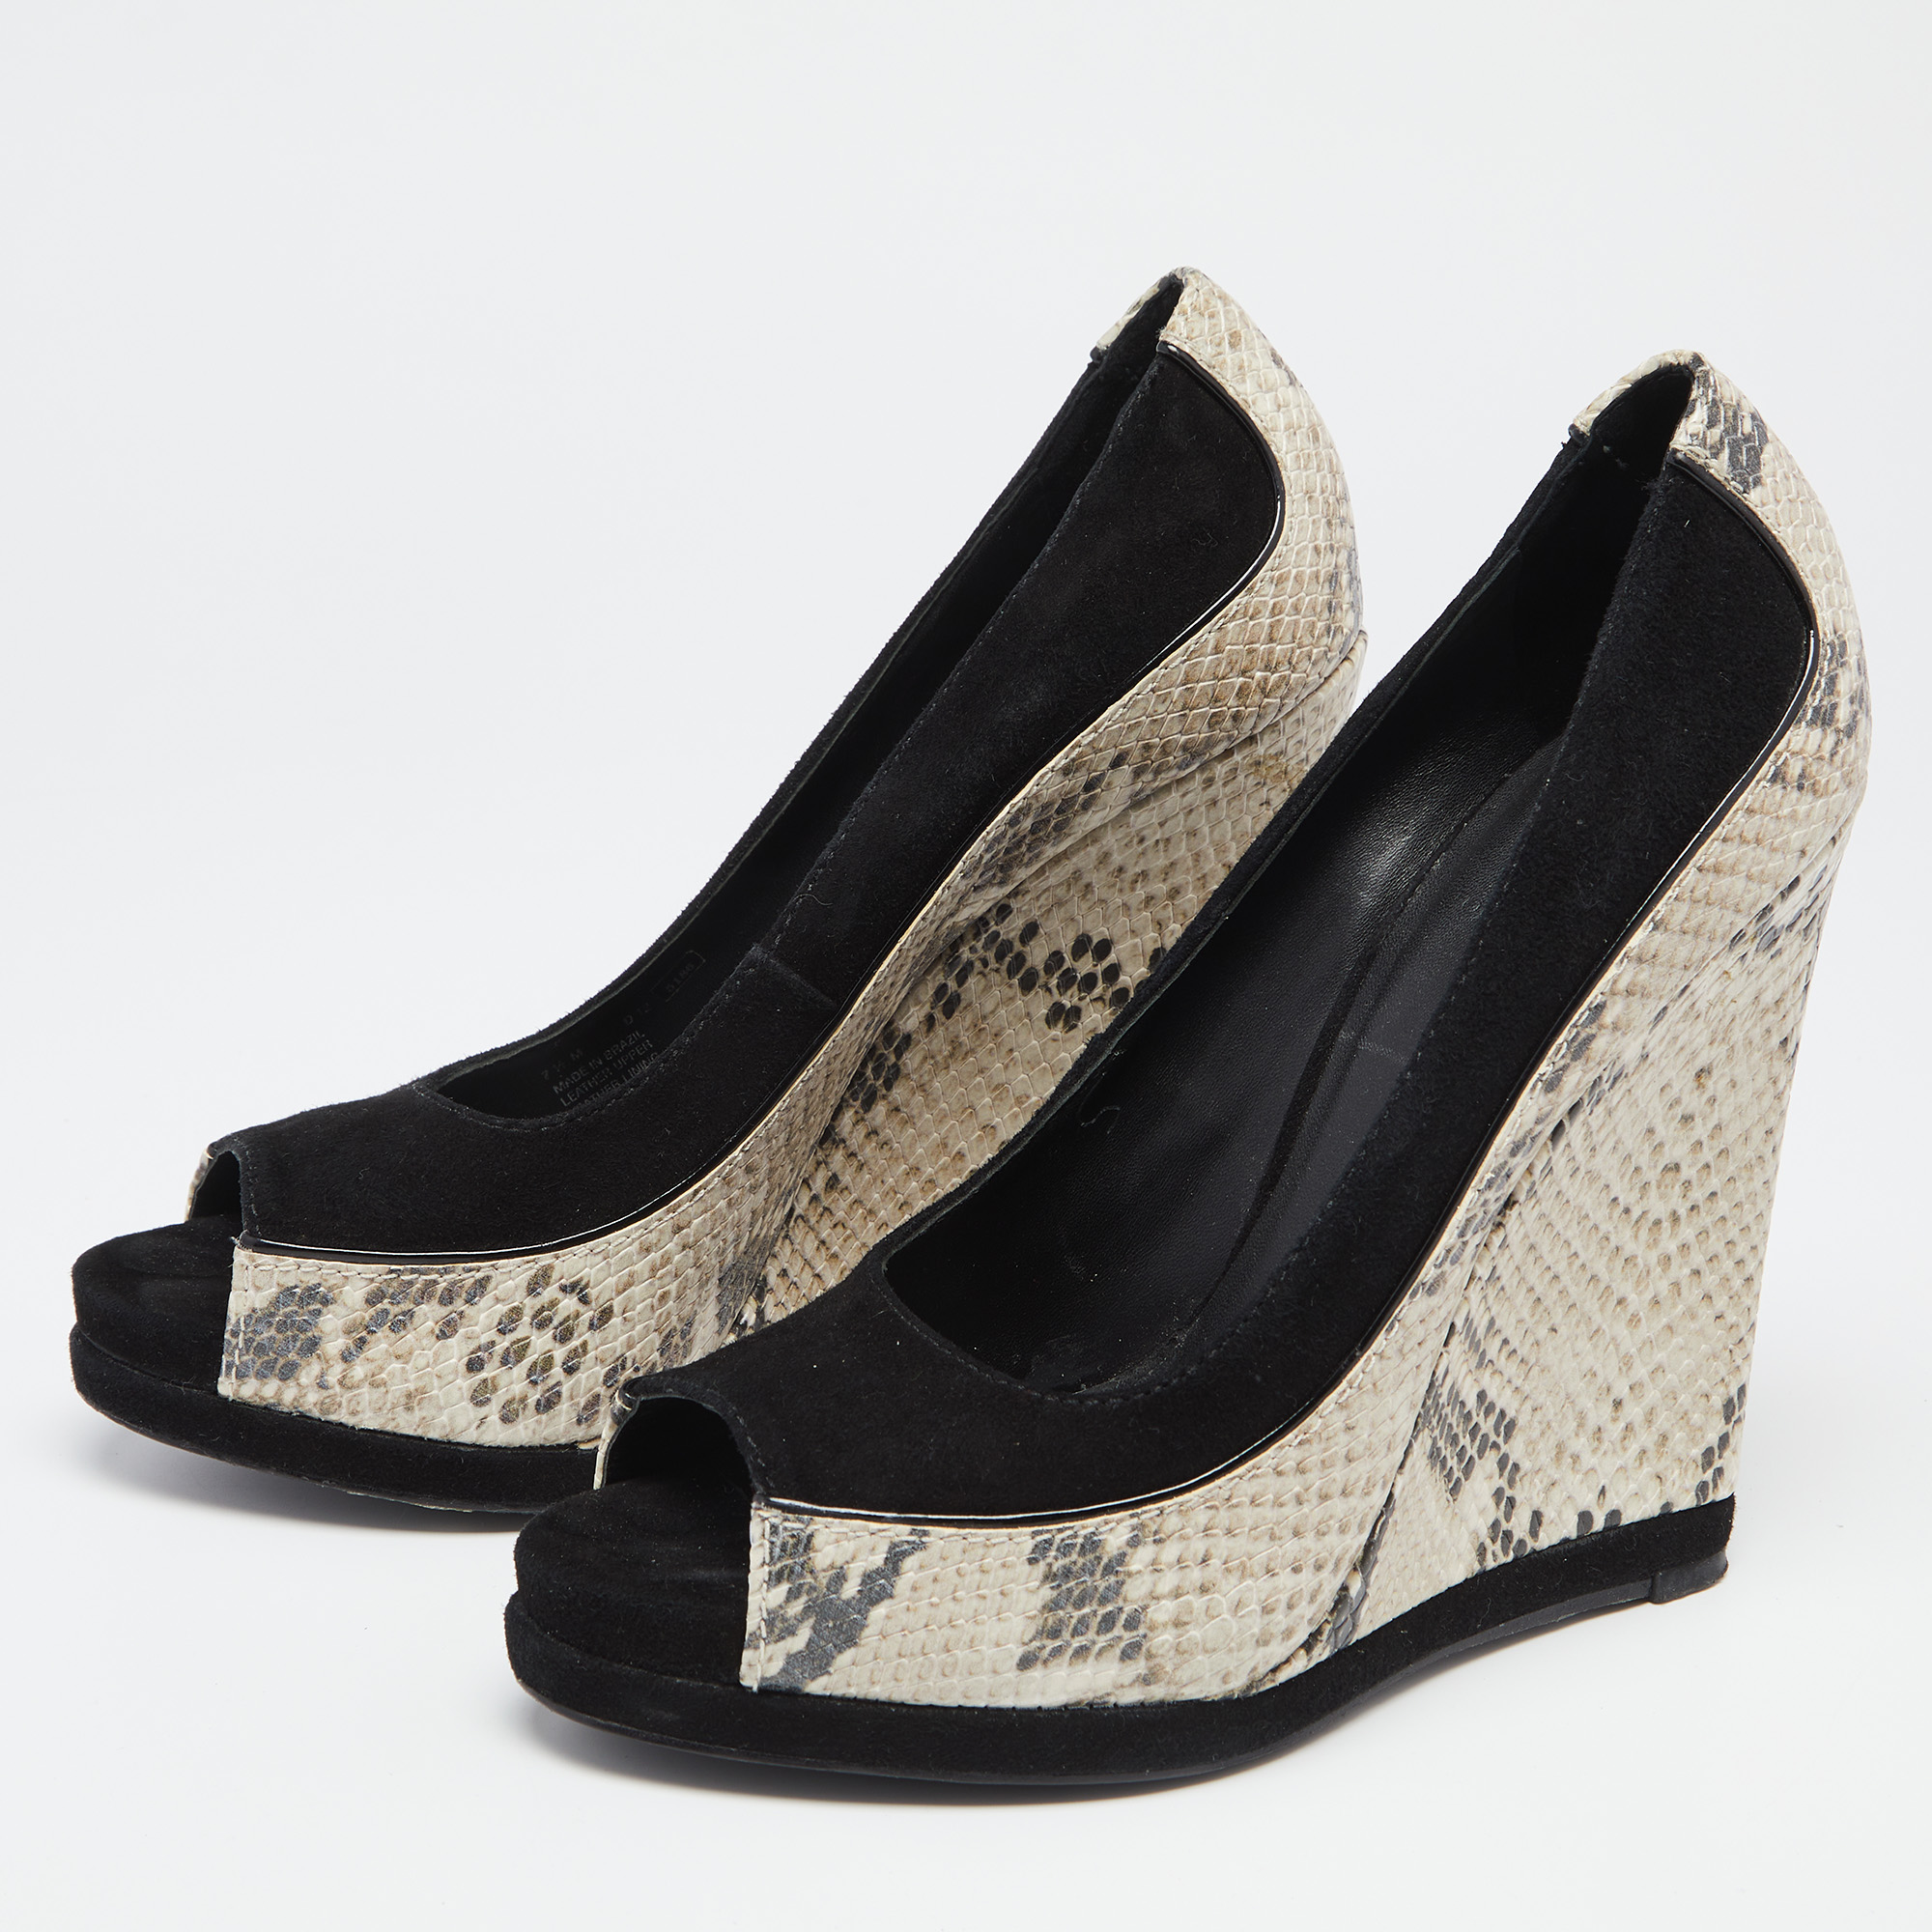 

Tory Burch Black/Grey Suede and Python Embossed Leather Sandra Wedge Peep Toe Pumps Size